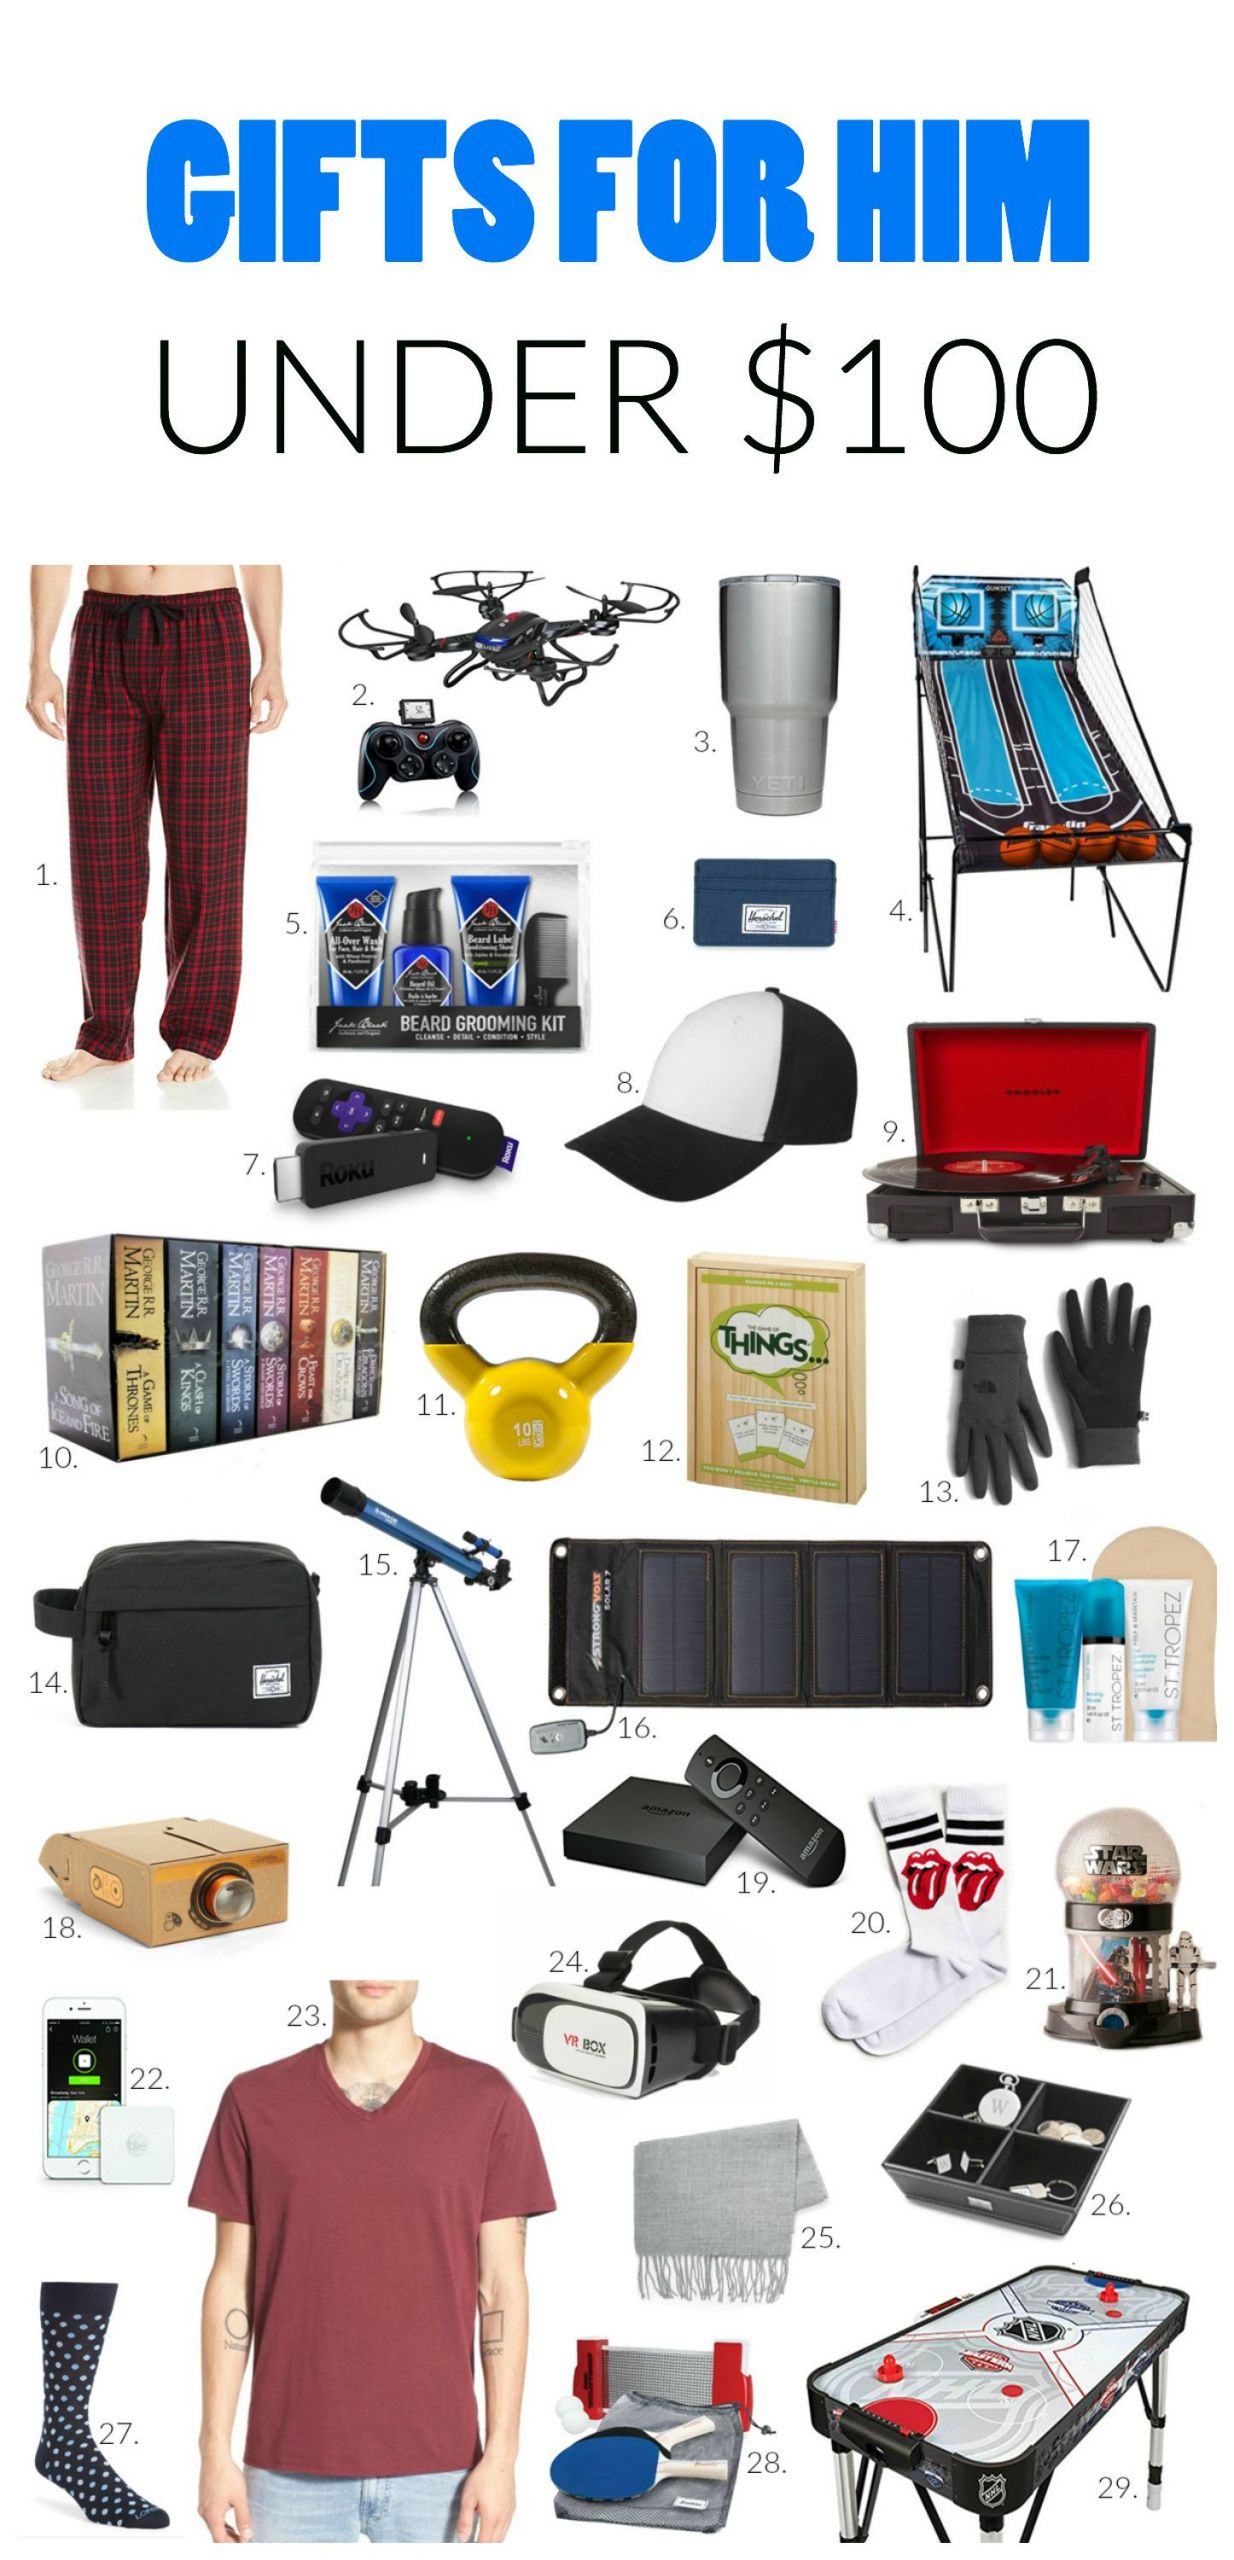 Valentine Gift Ideas For A Male Friend
 Gift Ideas for Him Under $100 With images